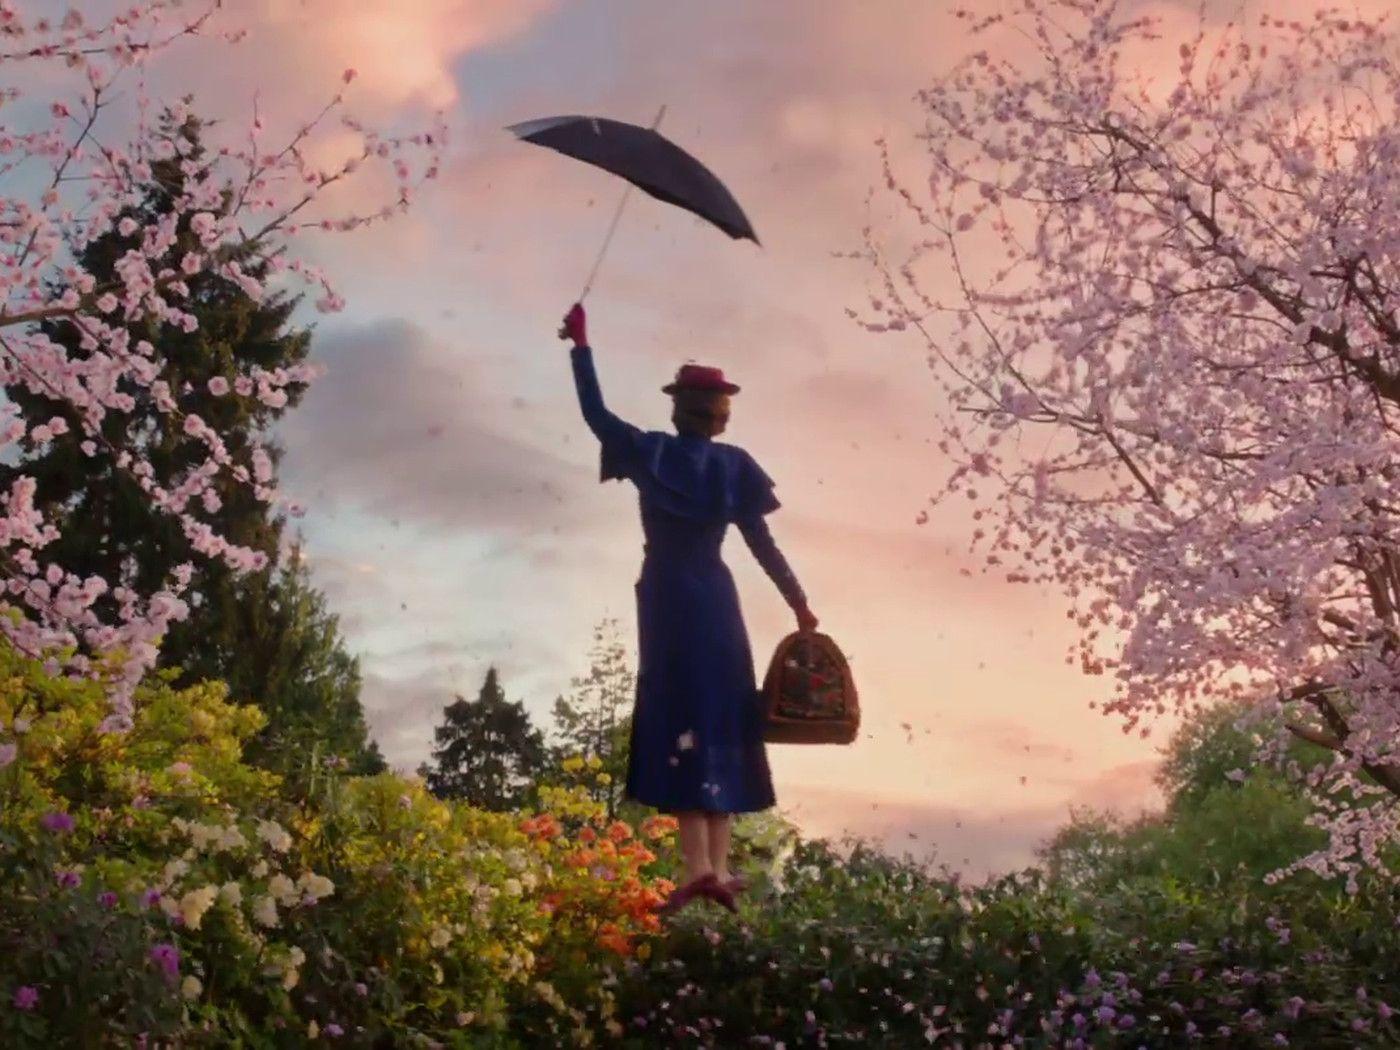 Mary Poppins Returns trailer reveals new songs, animated world